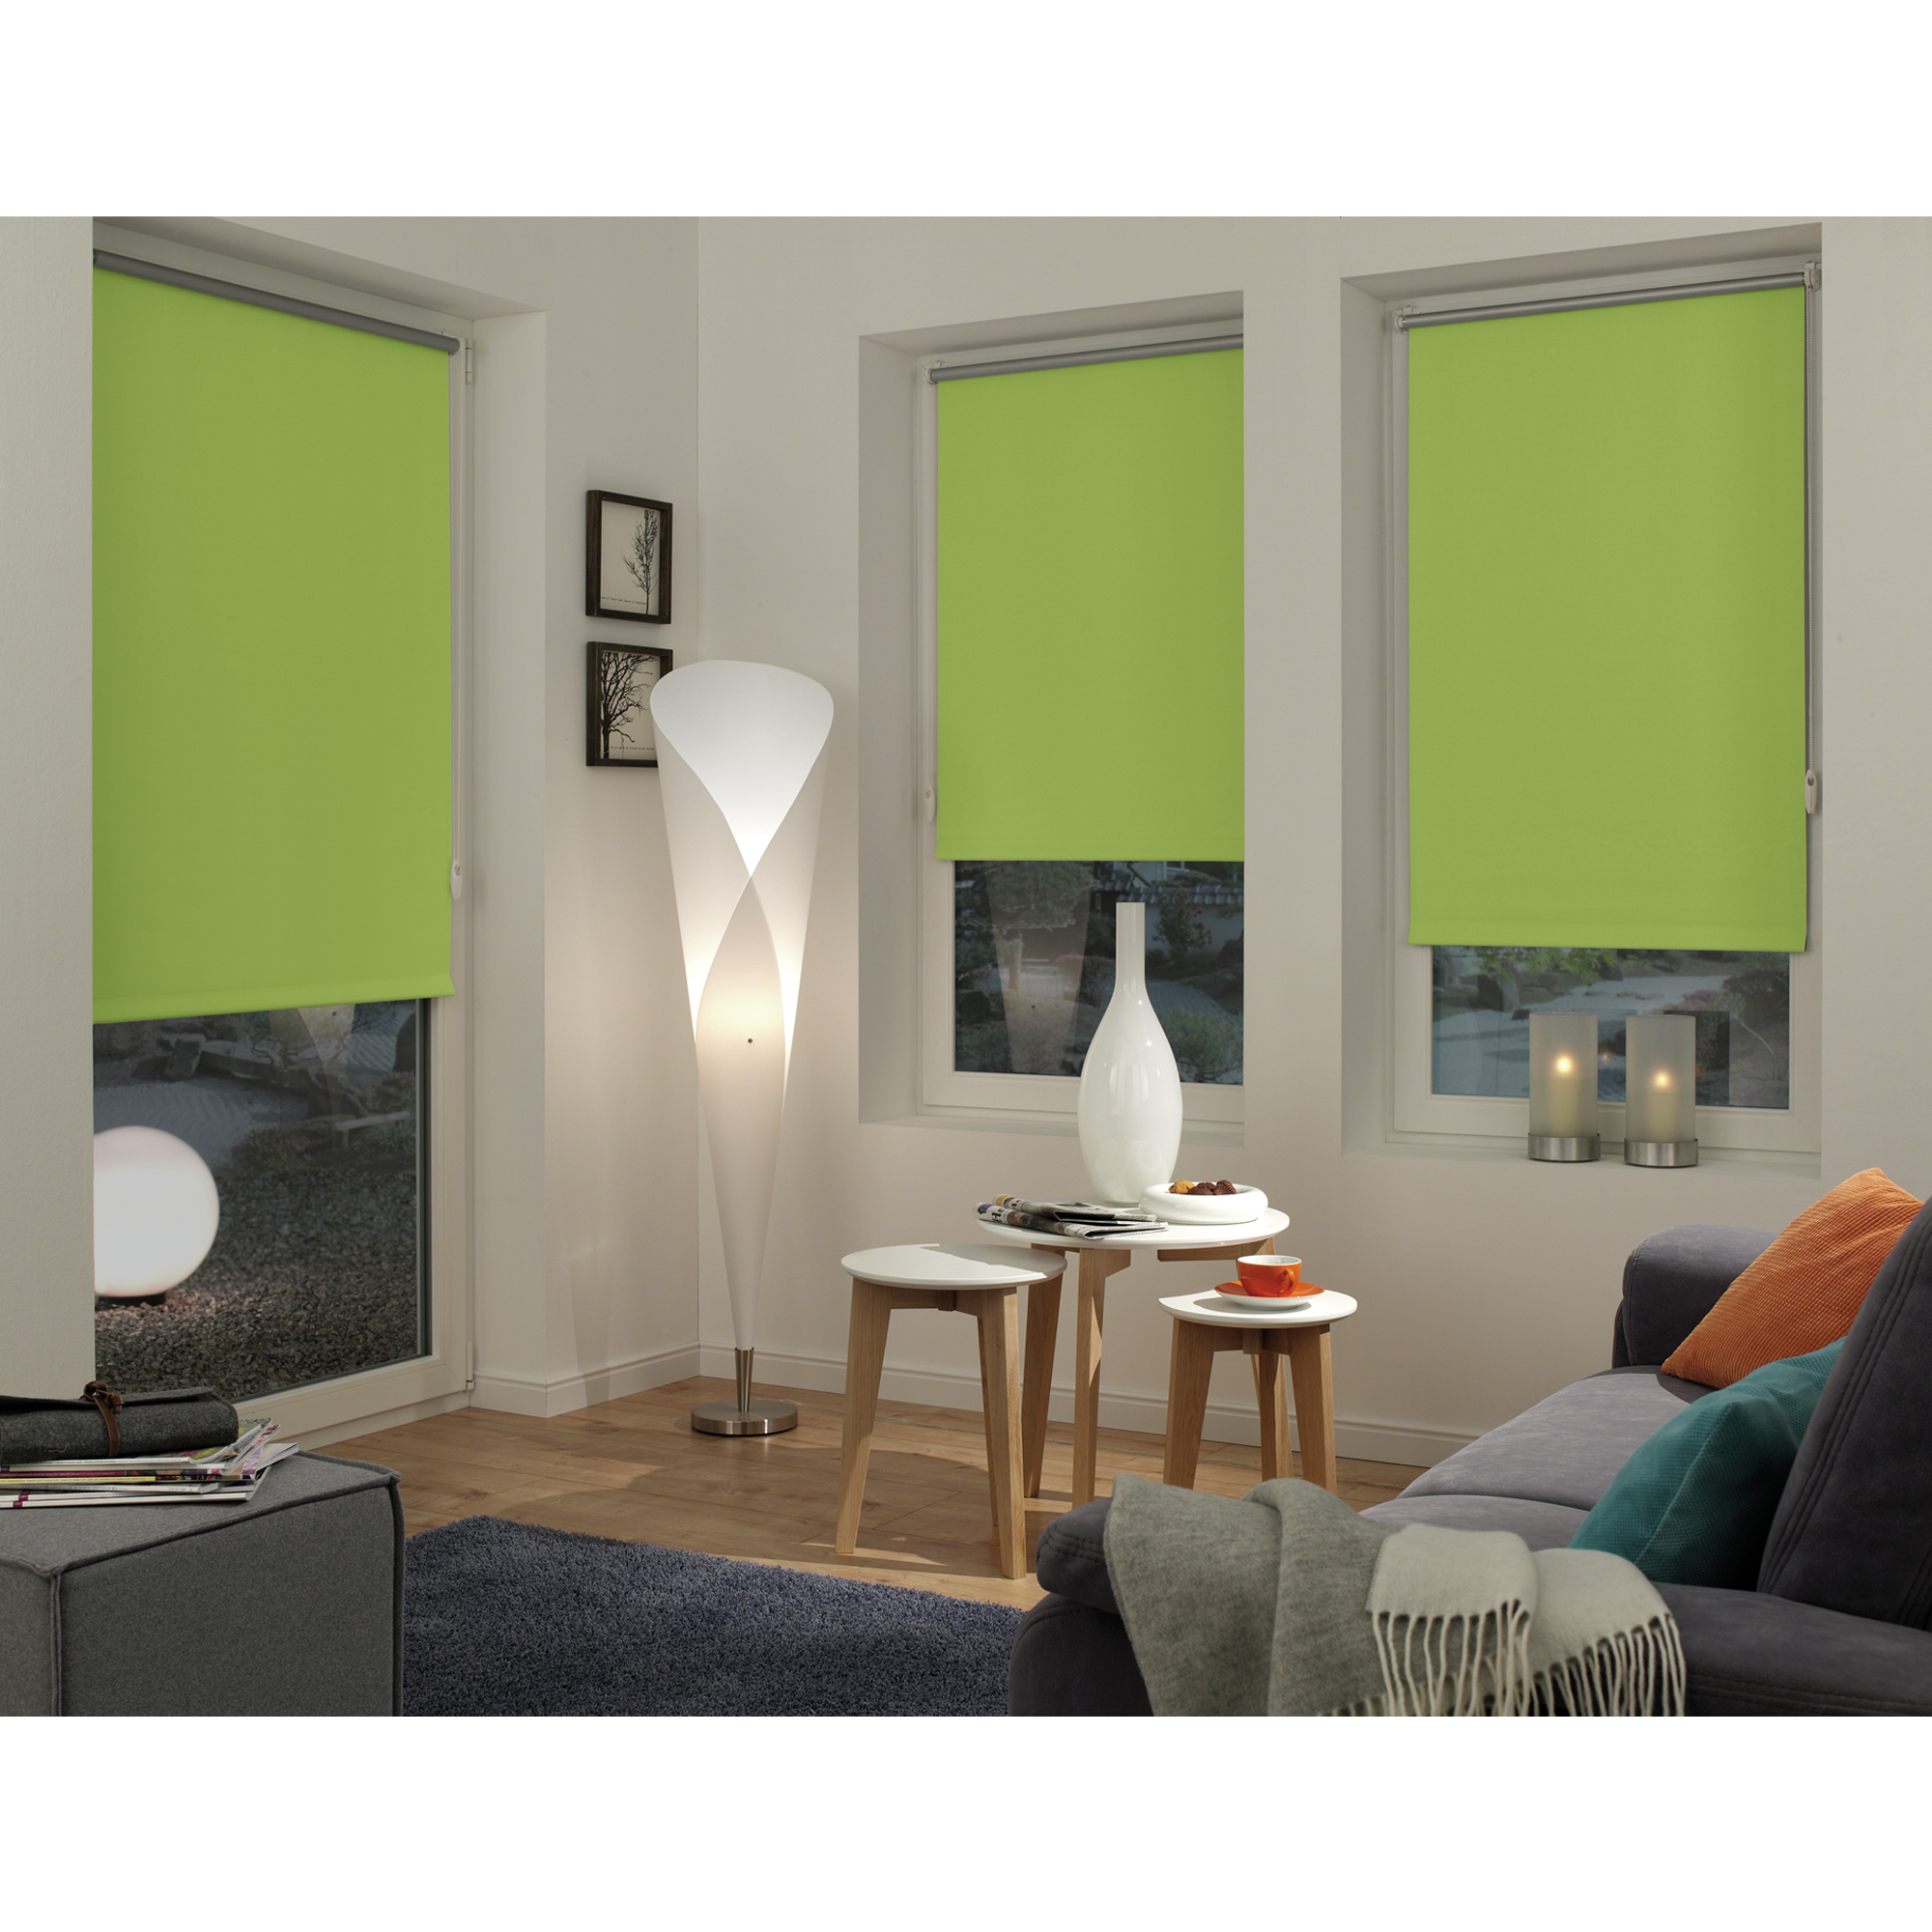 EasyFix Rollo 'Thermo energiesparend' apfel 120 x 150 cm + product picture